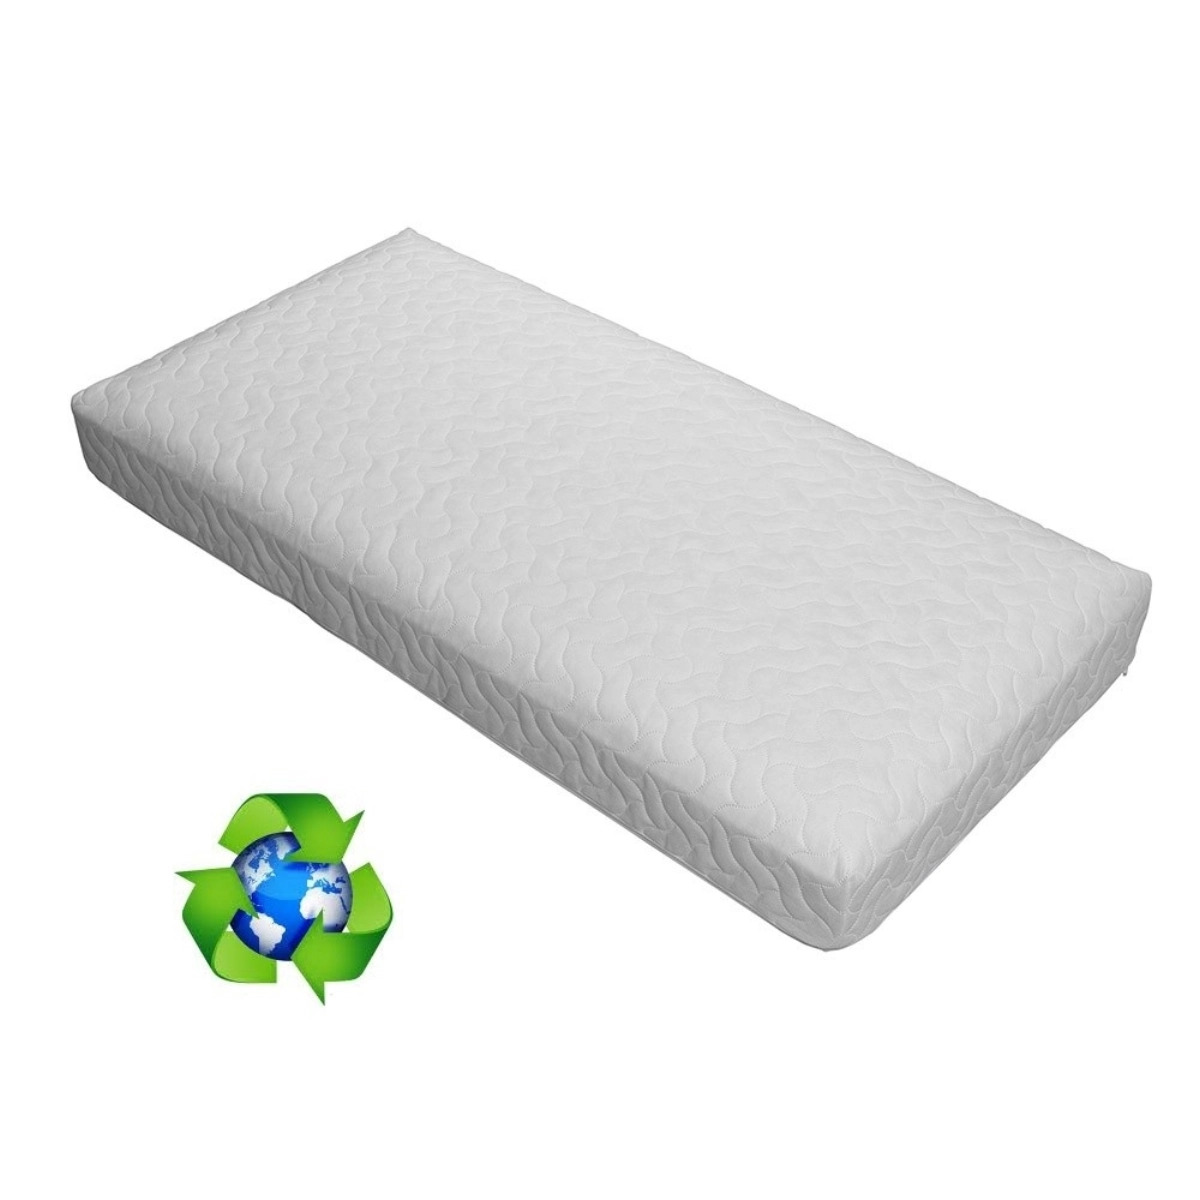 Image of Ventalux Non Allergenic Quilt Covered Solid Fibre Cot Bed Mattress-White (140x70)